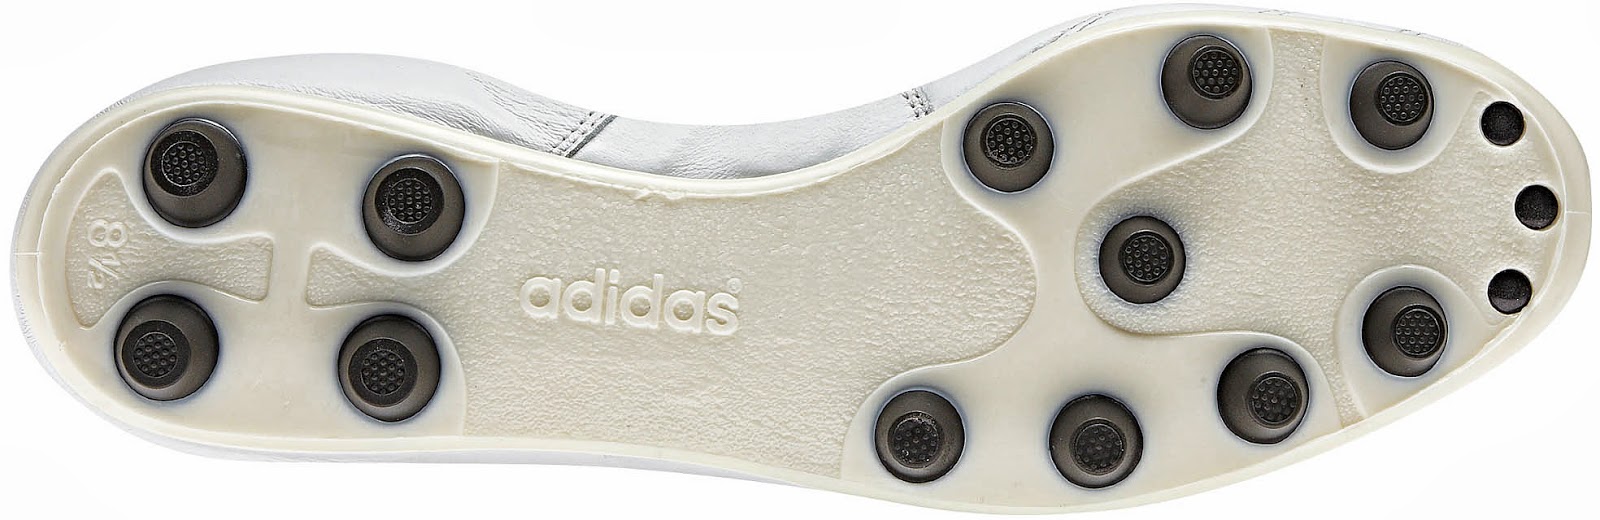 White Adidas Mundial Boot Released - Footy Headlines